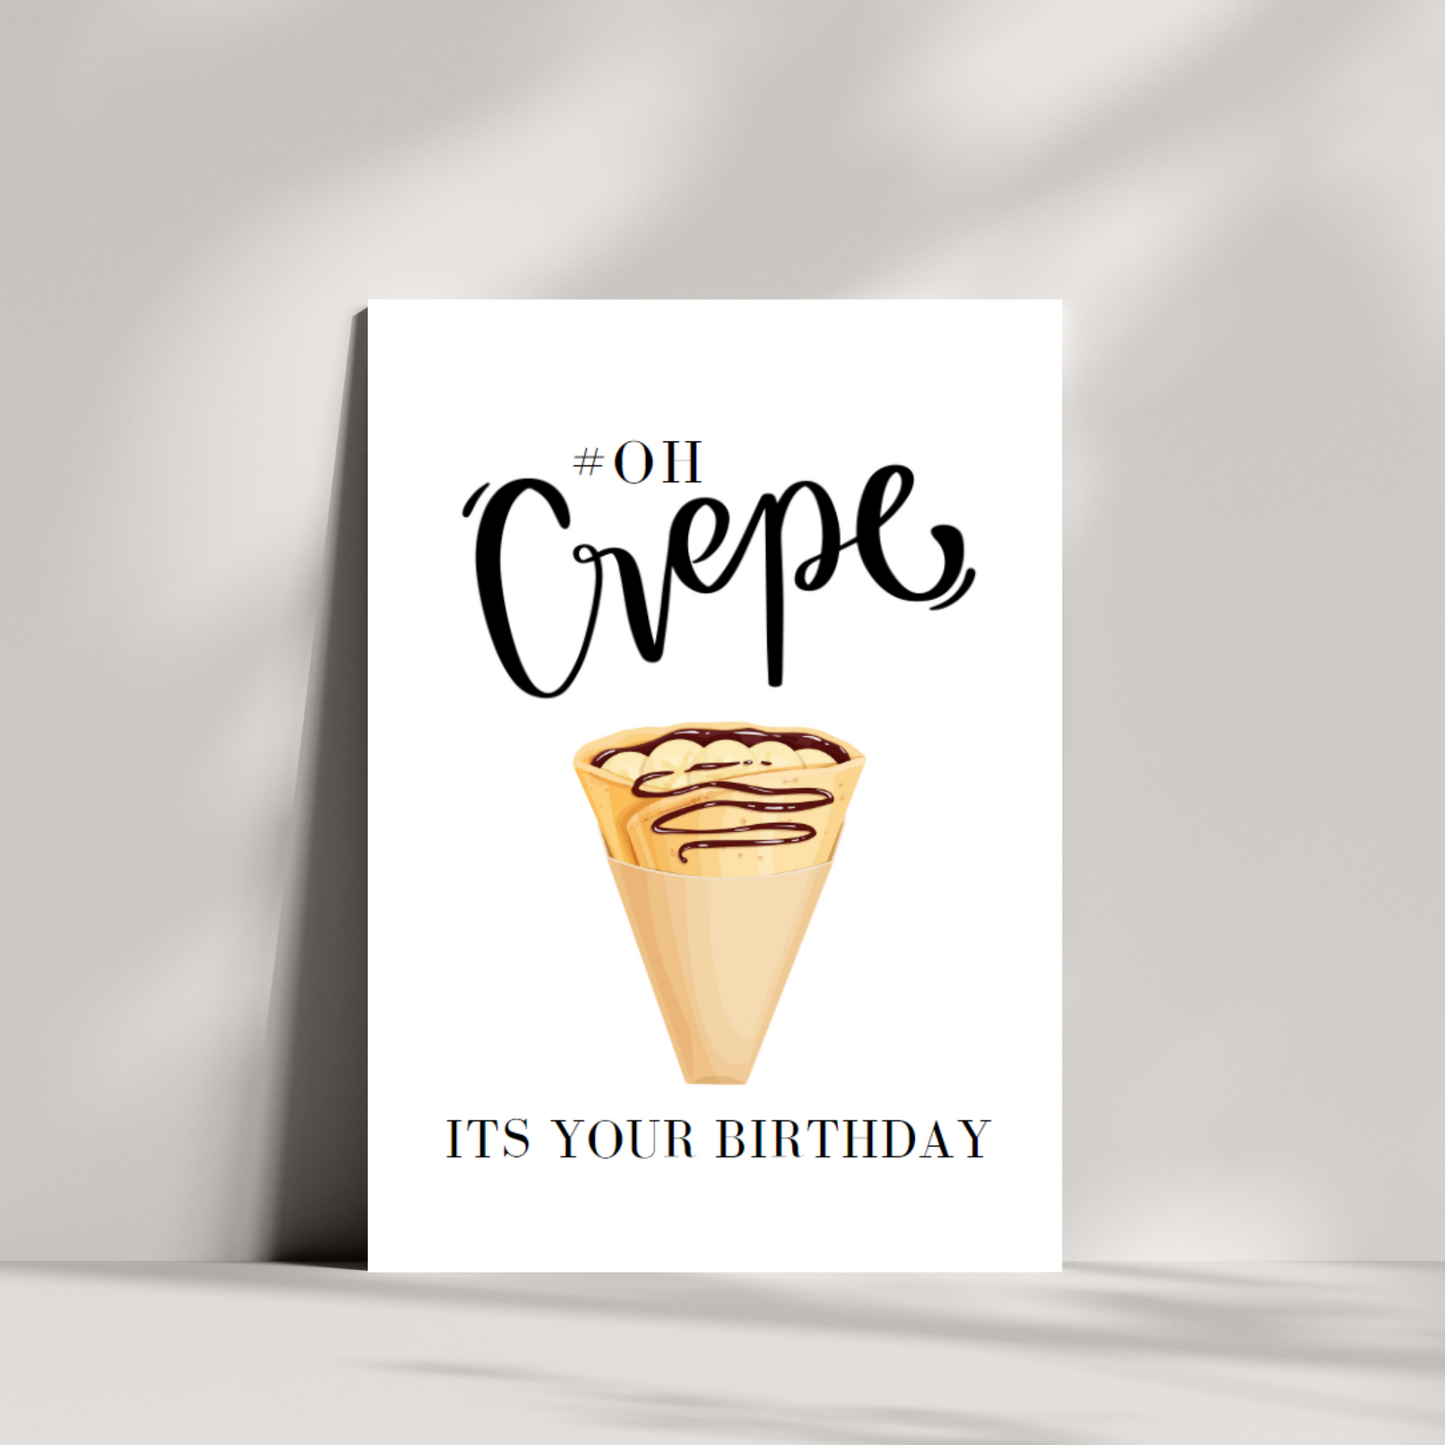 OH Crepe its your birthday - card